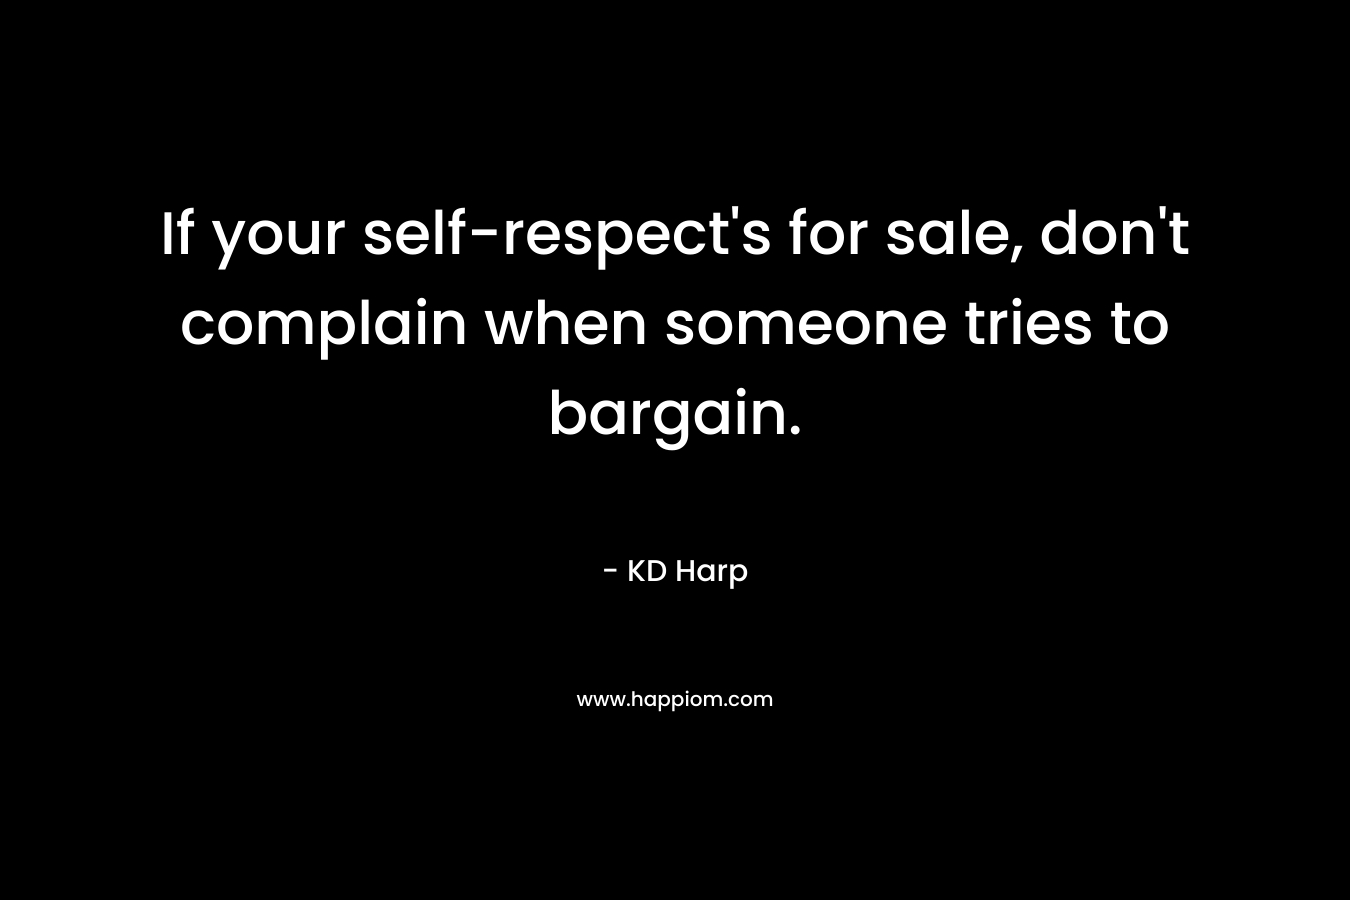 If your self-respect's for sale, don't complain when someone tries to bargain.